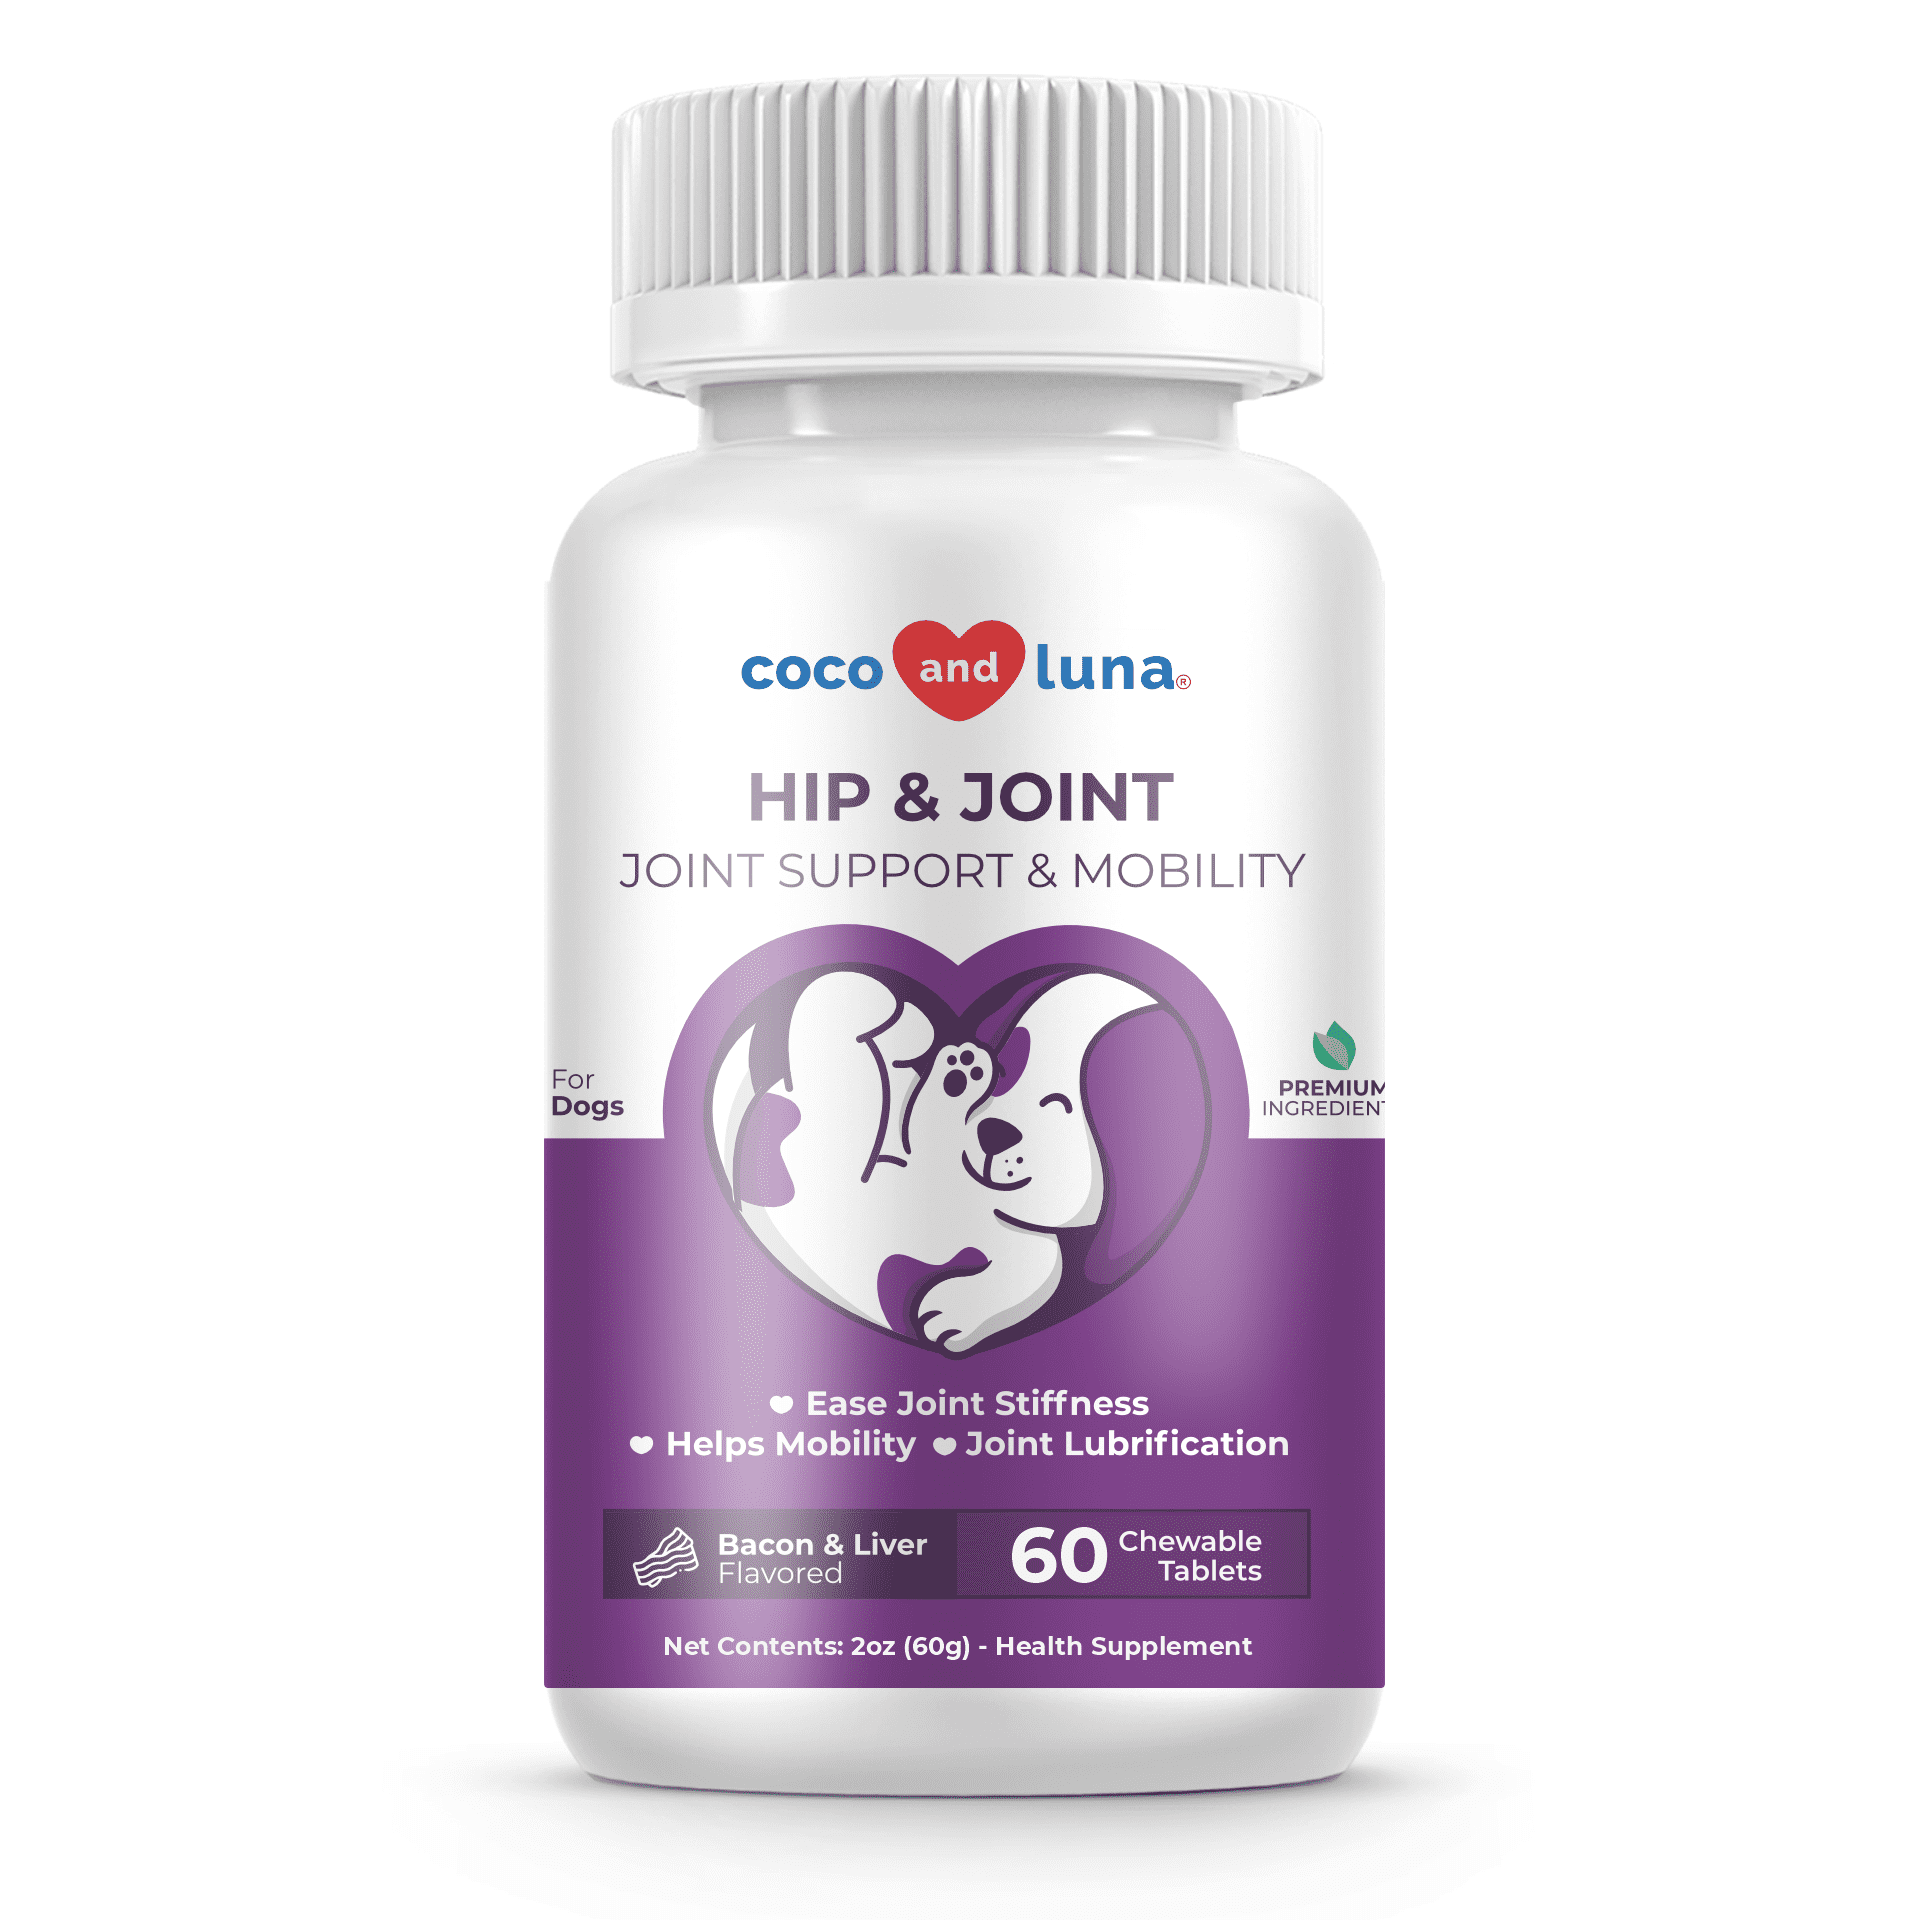 Hip and Joint Support for Dogs - 60 Chewable Tablets - Coco and Luna